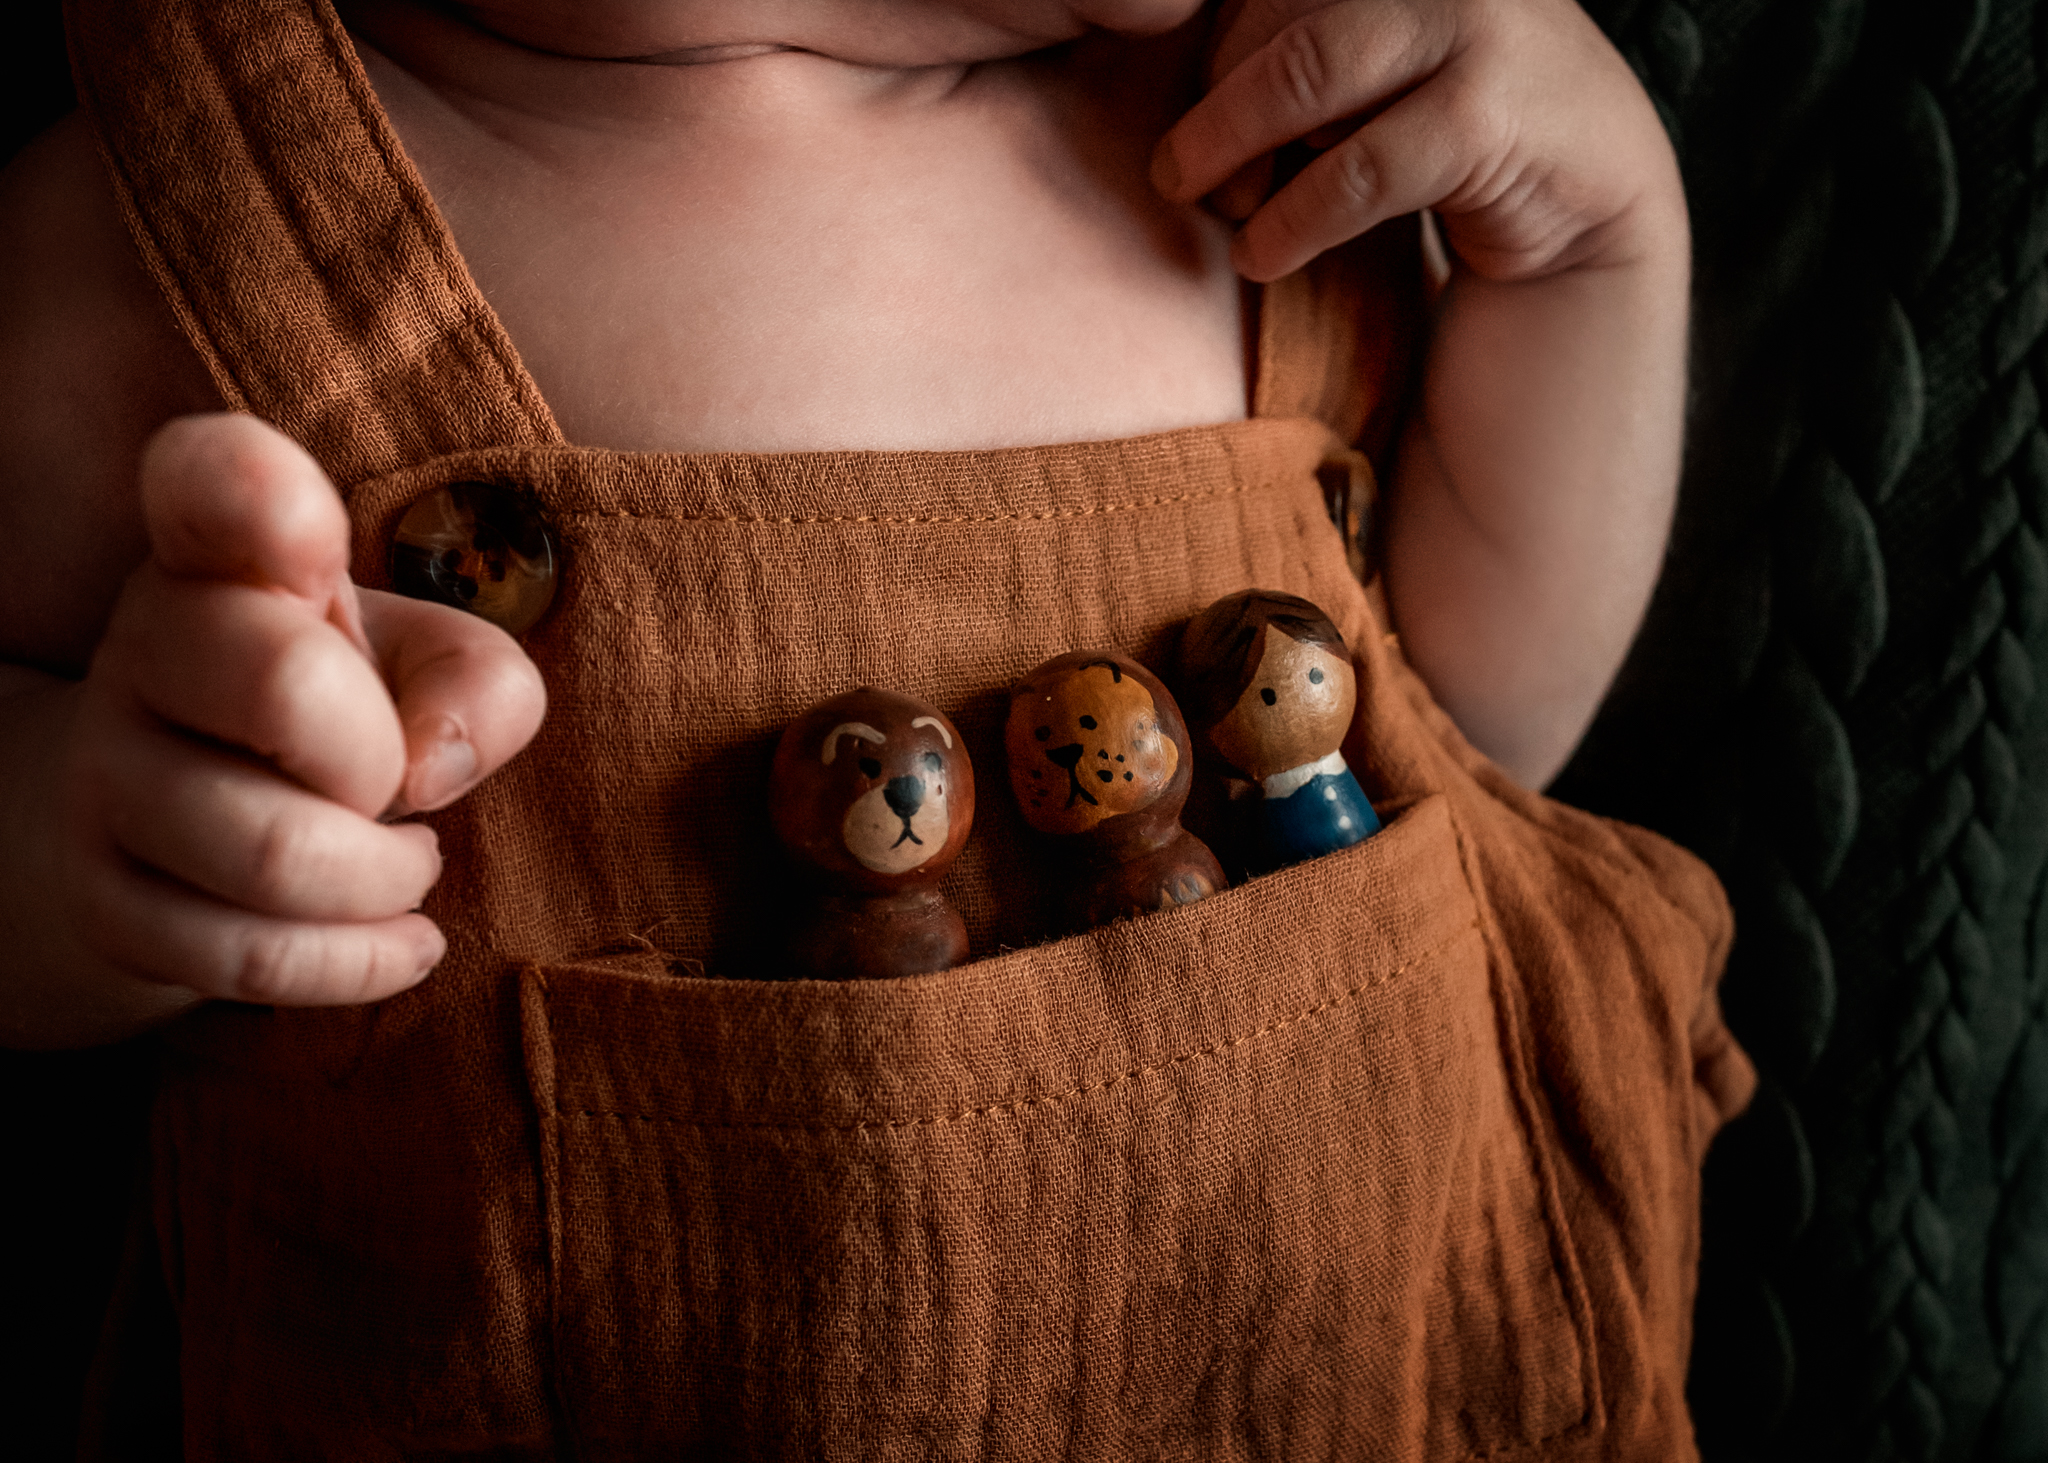 Beautiful Photos in Renovation Chaos - close up of wooden dolls